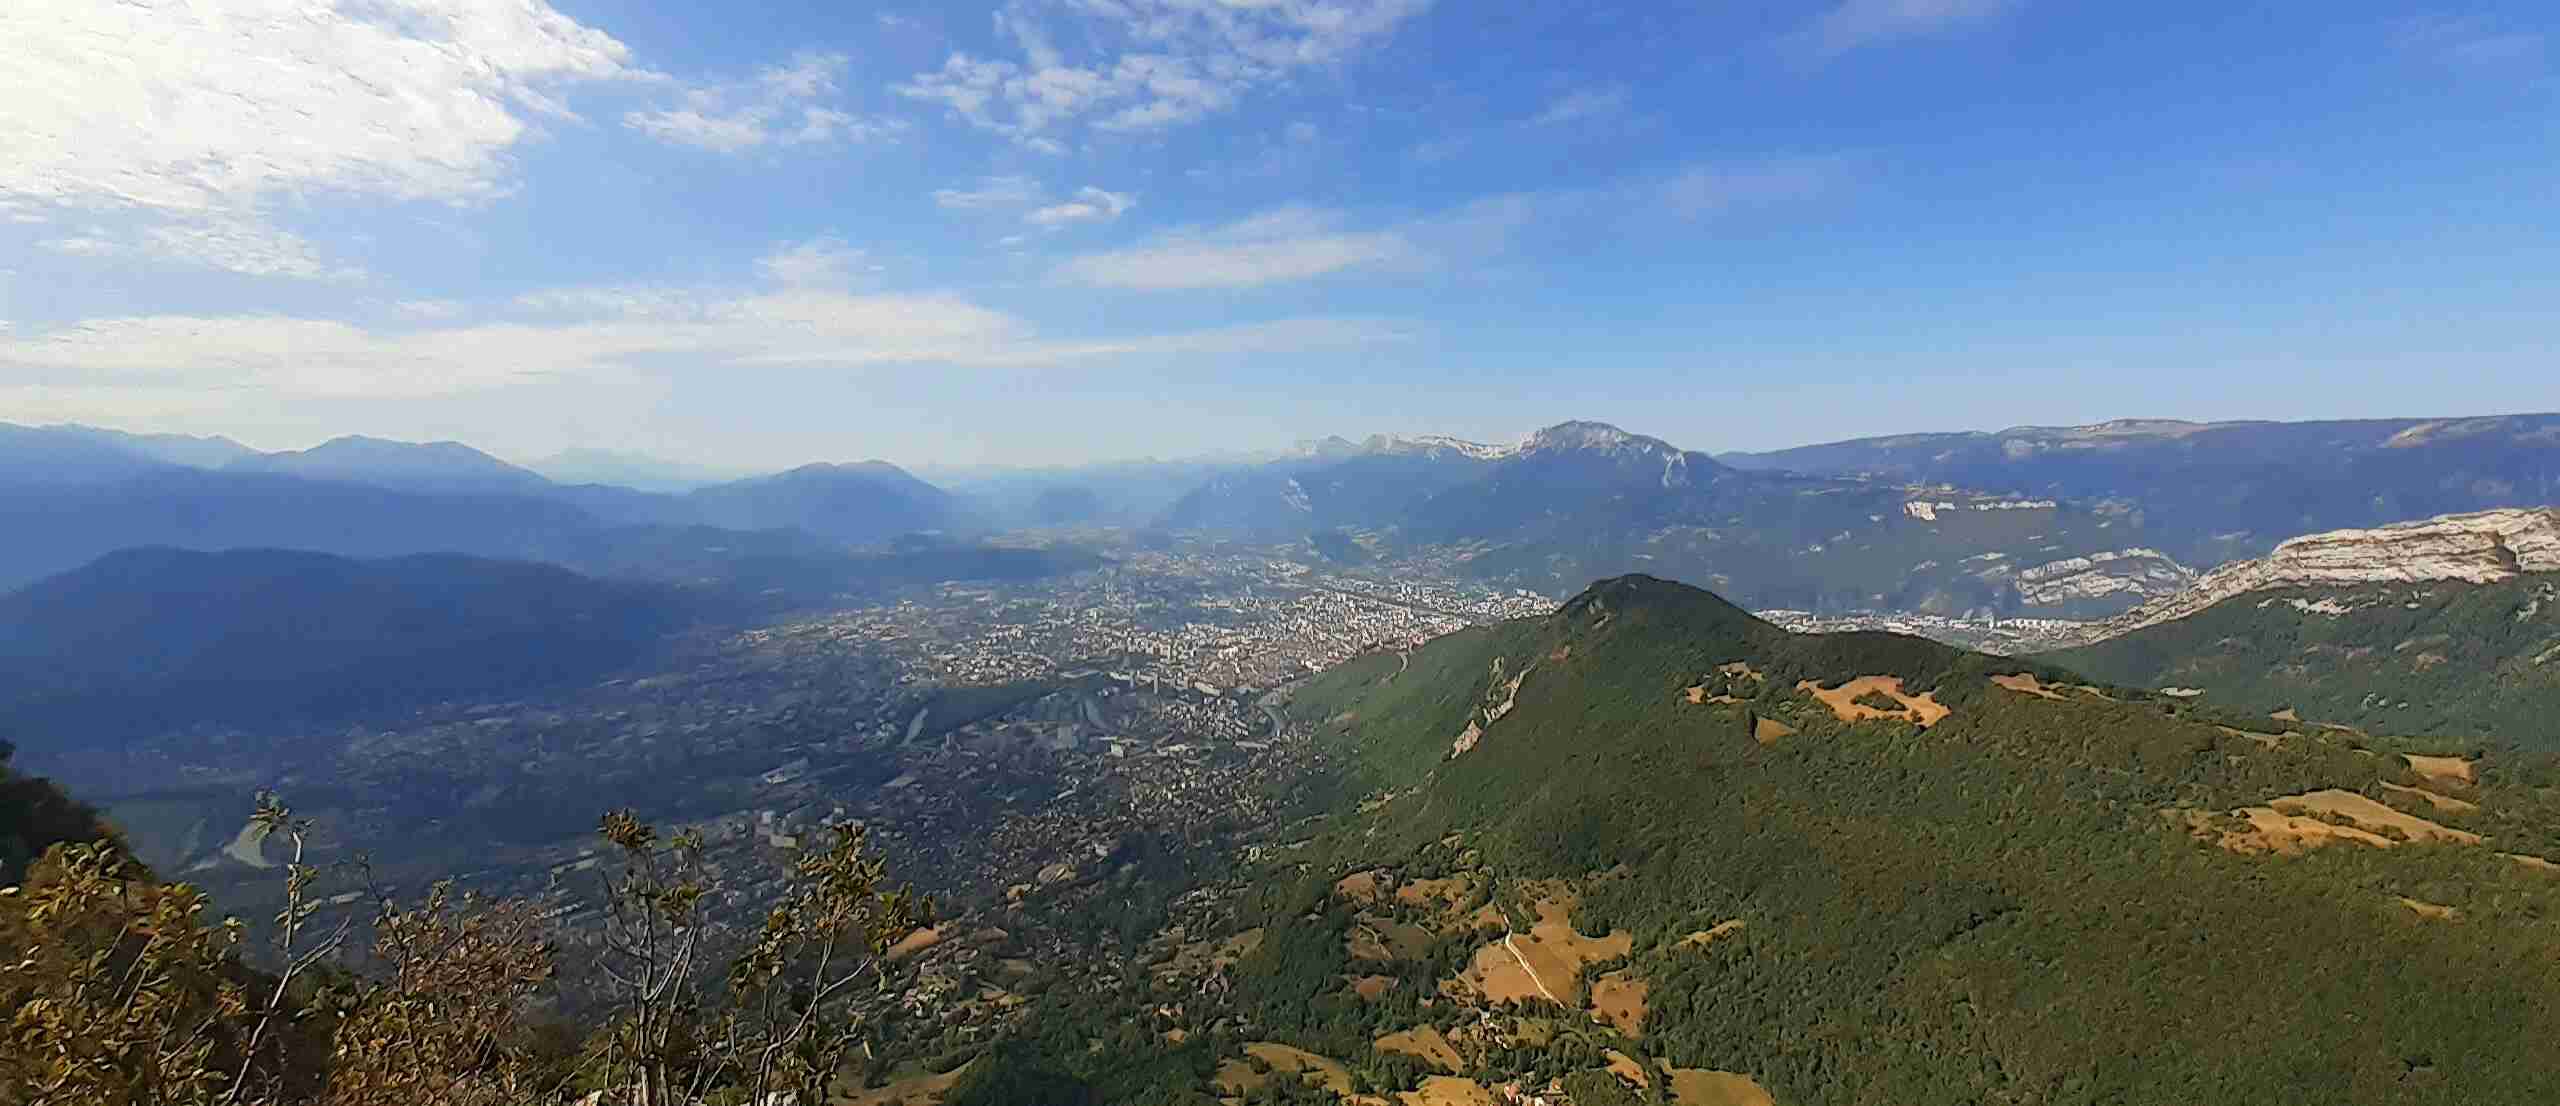 Picture showing Grenoble view from mountains.